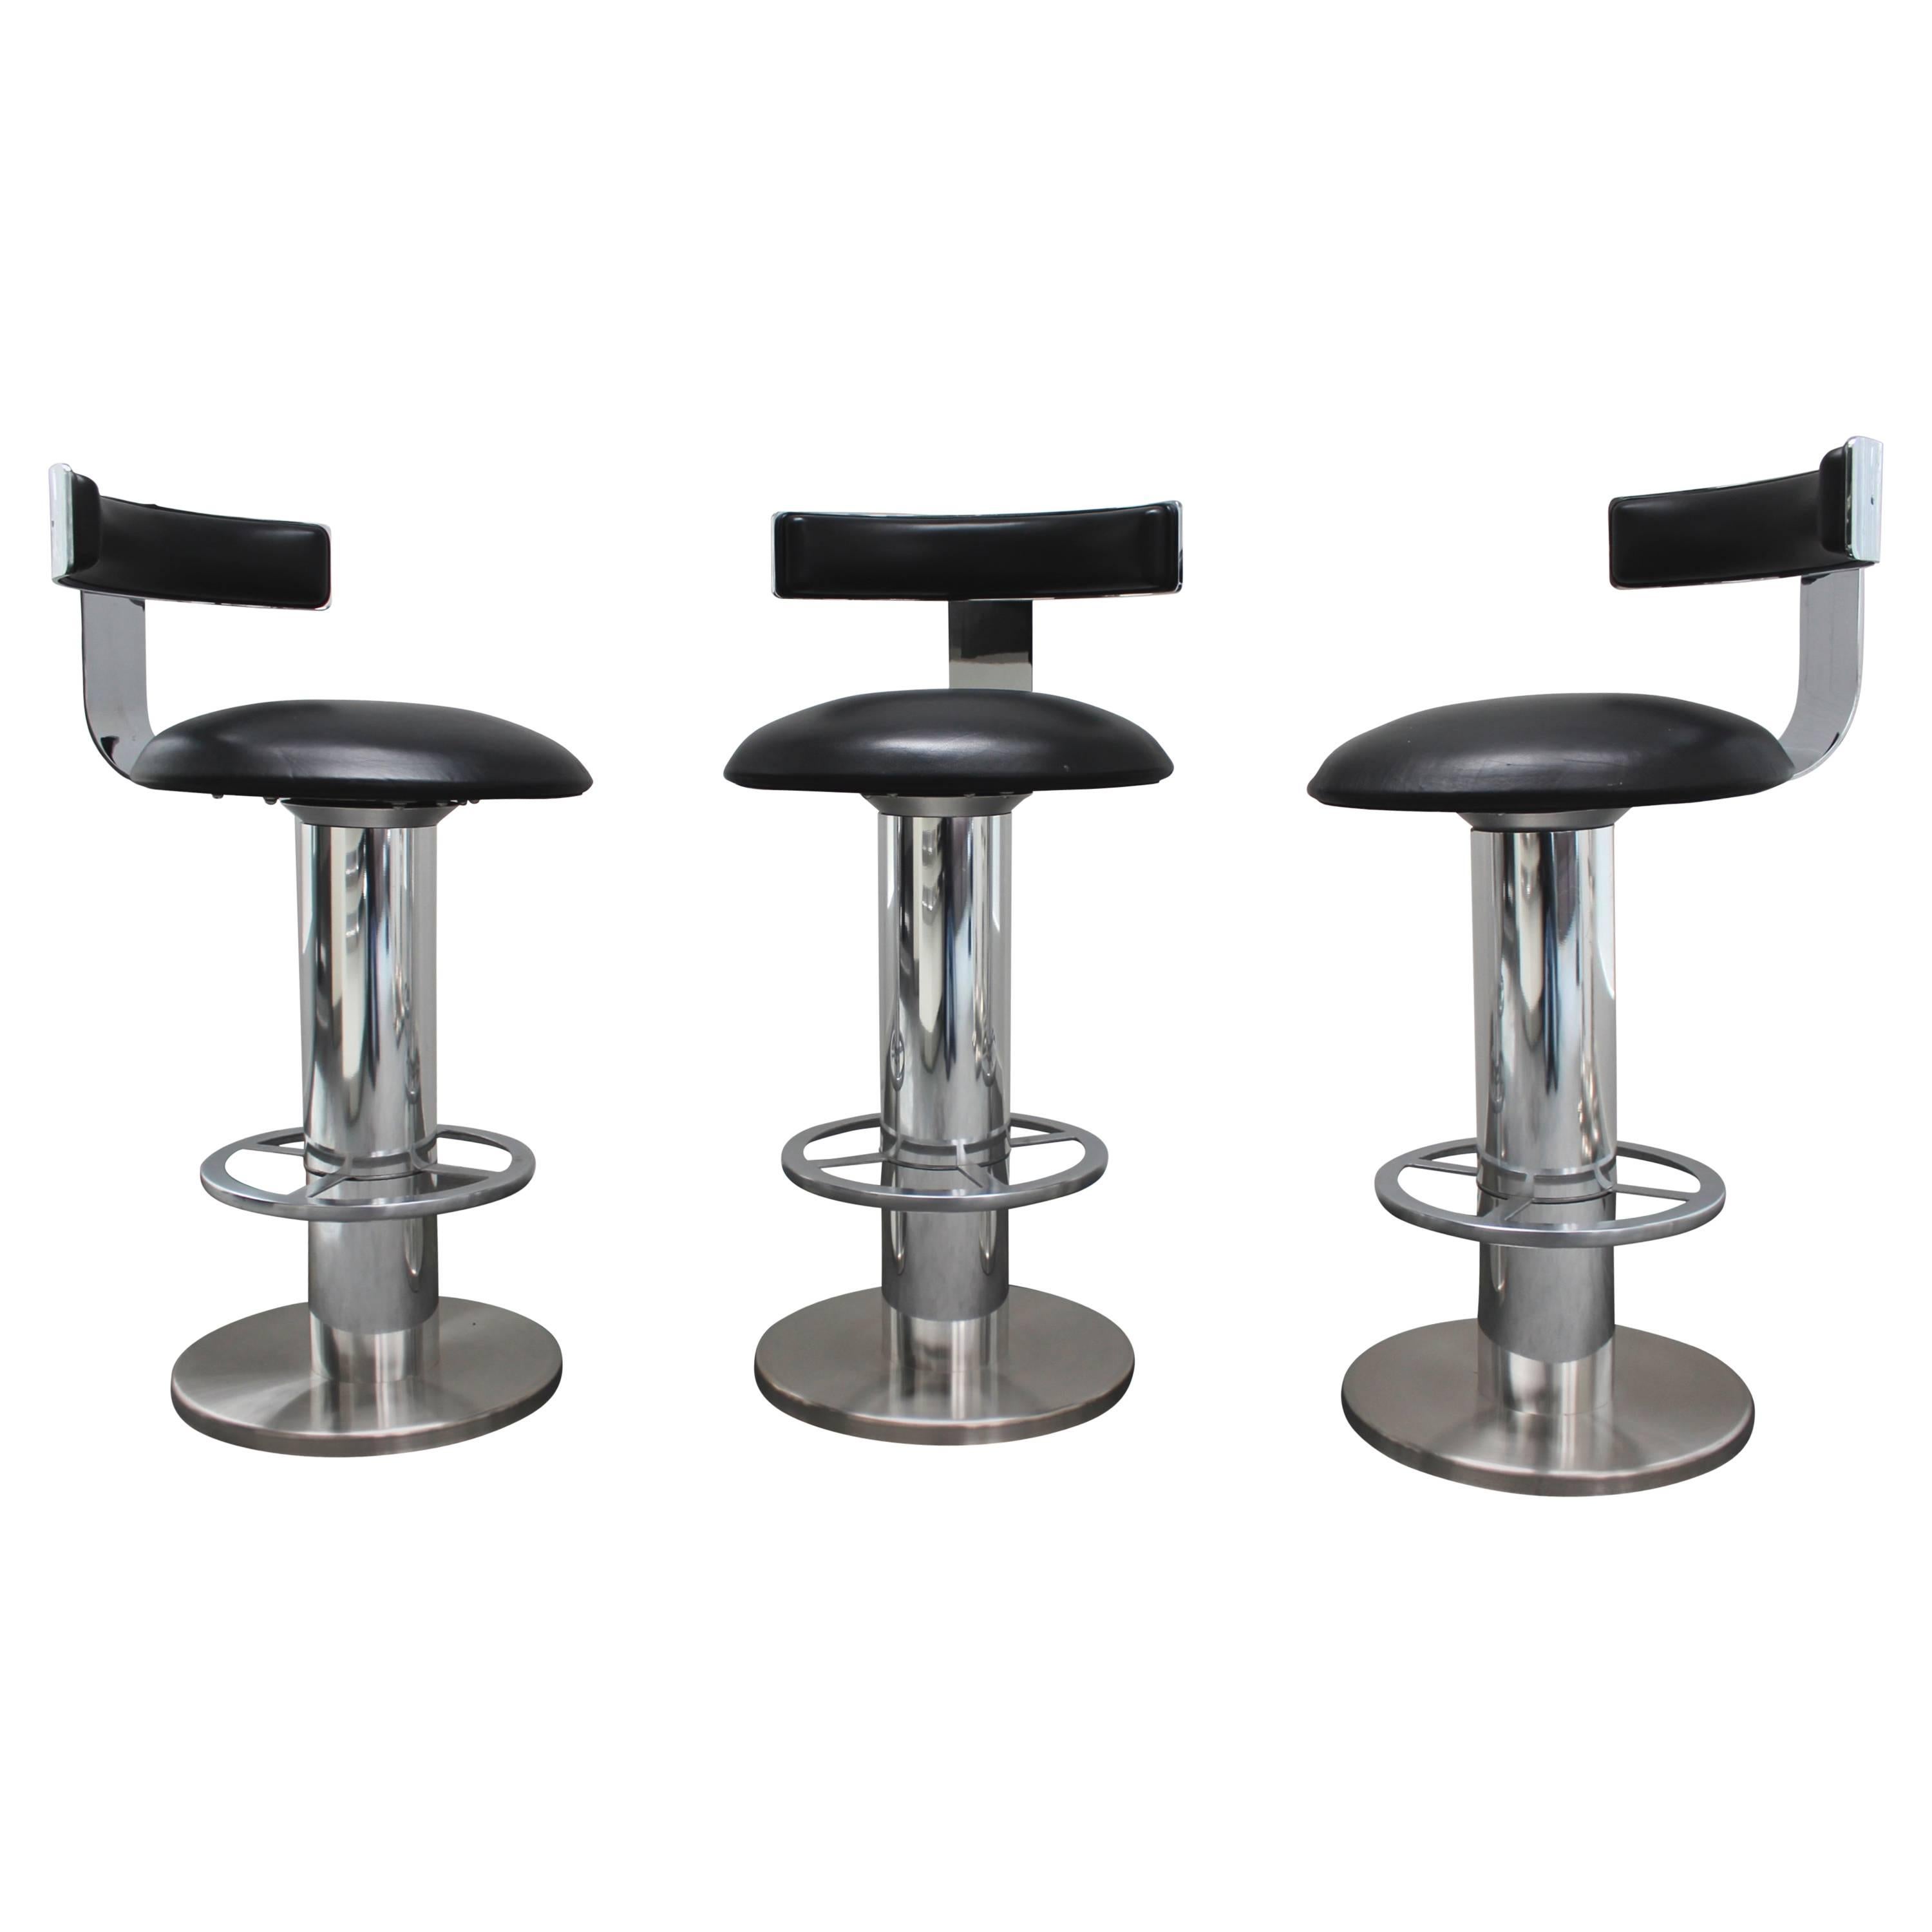 Designs for Leisure Chrome and Leather Bar Stools